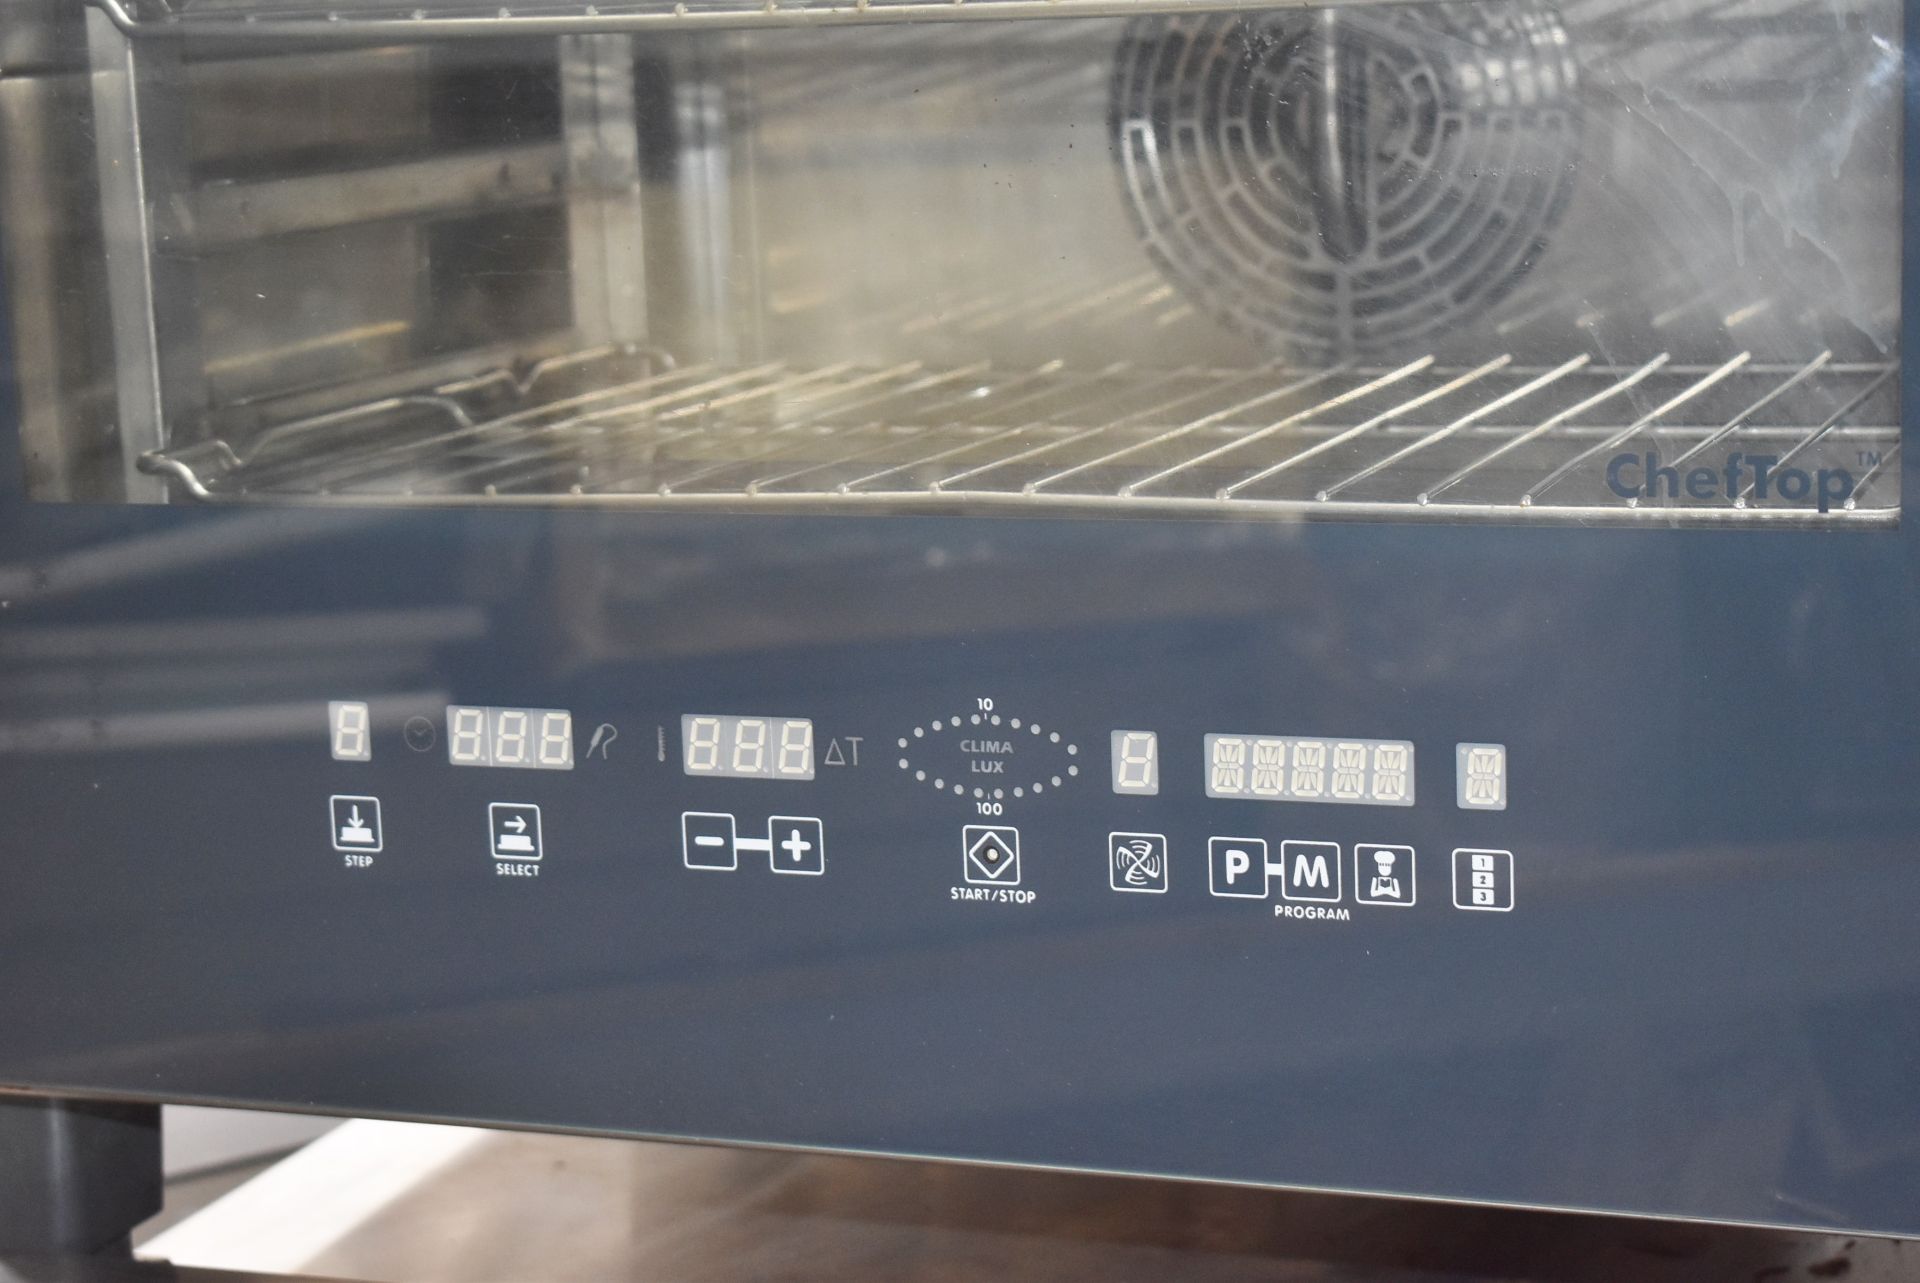 1 x Unox ChefTop XVL385 Commercial 3 Phase Double Oven For Slow Cooking Meats, Proving Dough & More - Image 16 of 26